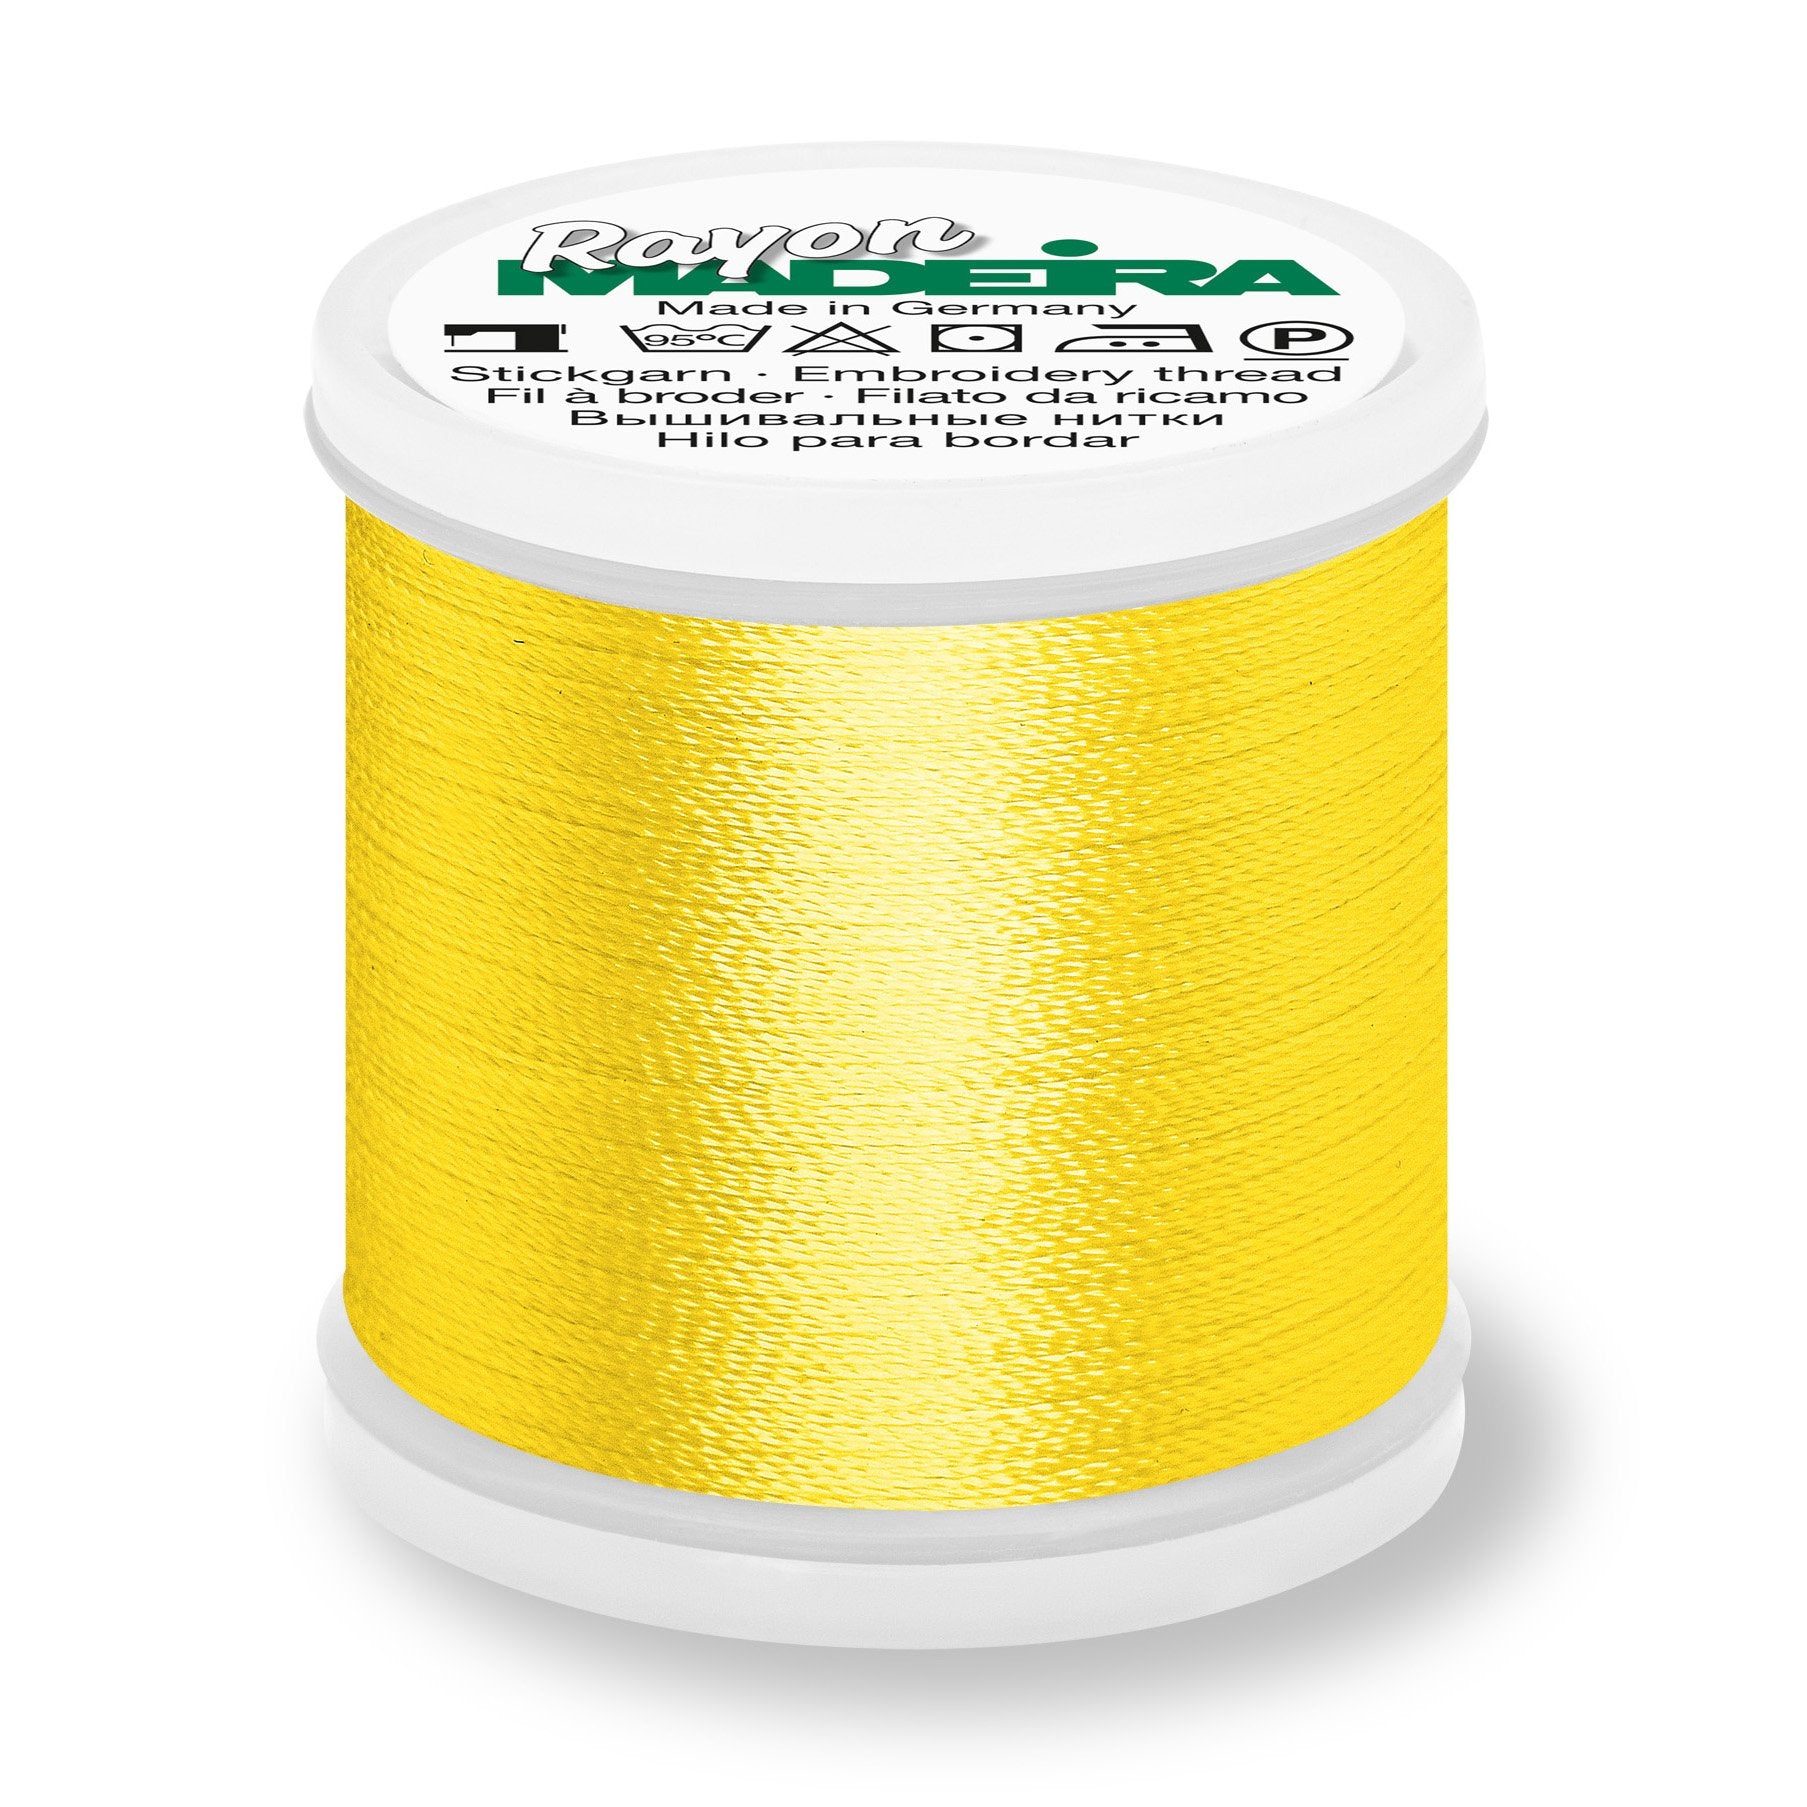 Madeira Rayon 40 Embroidery Thread 200m #1068 Yellow from Jaycotts Sewing Supplies